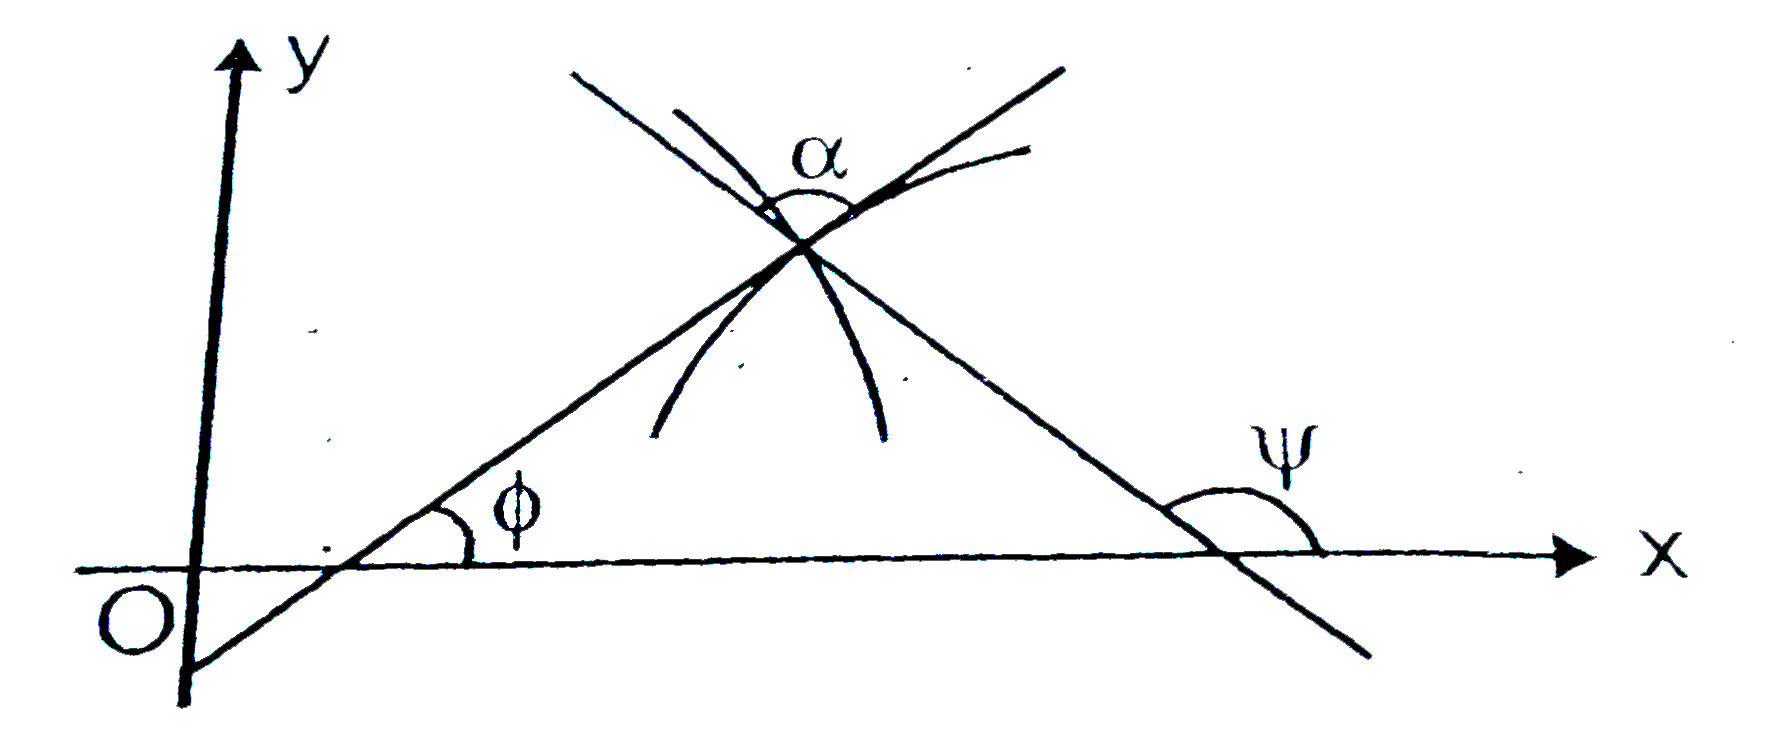 Let the trajectories cut the crve of given family at an angle alpha where tna alpha = k.   The slope (dy)/(dx) = tan Psi (of the tangent to a member of the family and the slope (dy(T))/(dx) = tan Phi to the isogonal trajectory are connected by the relationship      tan phi = tan (Psi - alpha) = (tan Psi - tan alpha)/(1+ tan alpha tan Psi)   i.e., (dy)/(dx) = (((dy(T))/(dx))-k)/(k(dy(T))/(dx)+1)   Substituting this expression into equation, (l') and dropping the subscript T, we obtain the differential equation of isogonal trajectories.   The isogonal trajectories of a family of straight lines y = c, that cuts the given family at angle alpha, the tangent of which is k, is